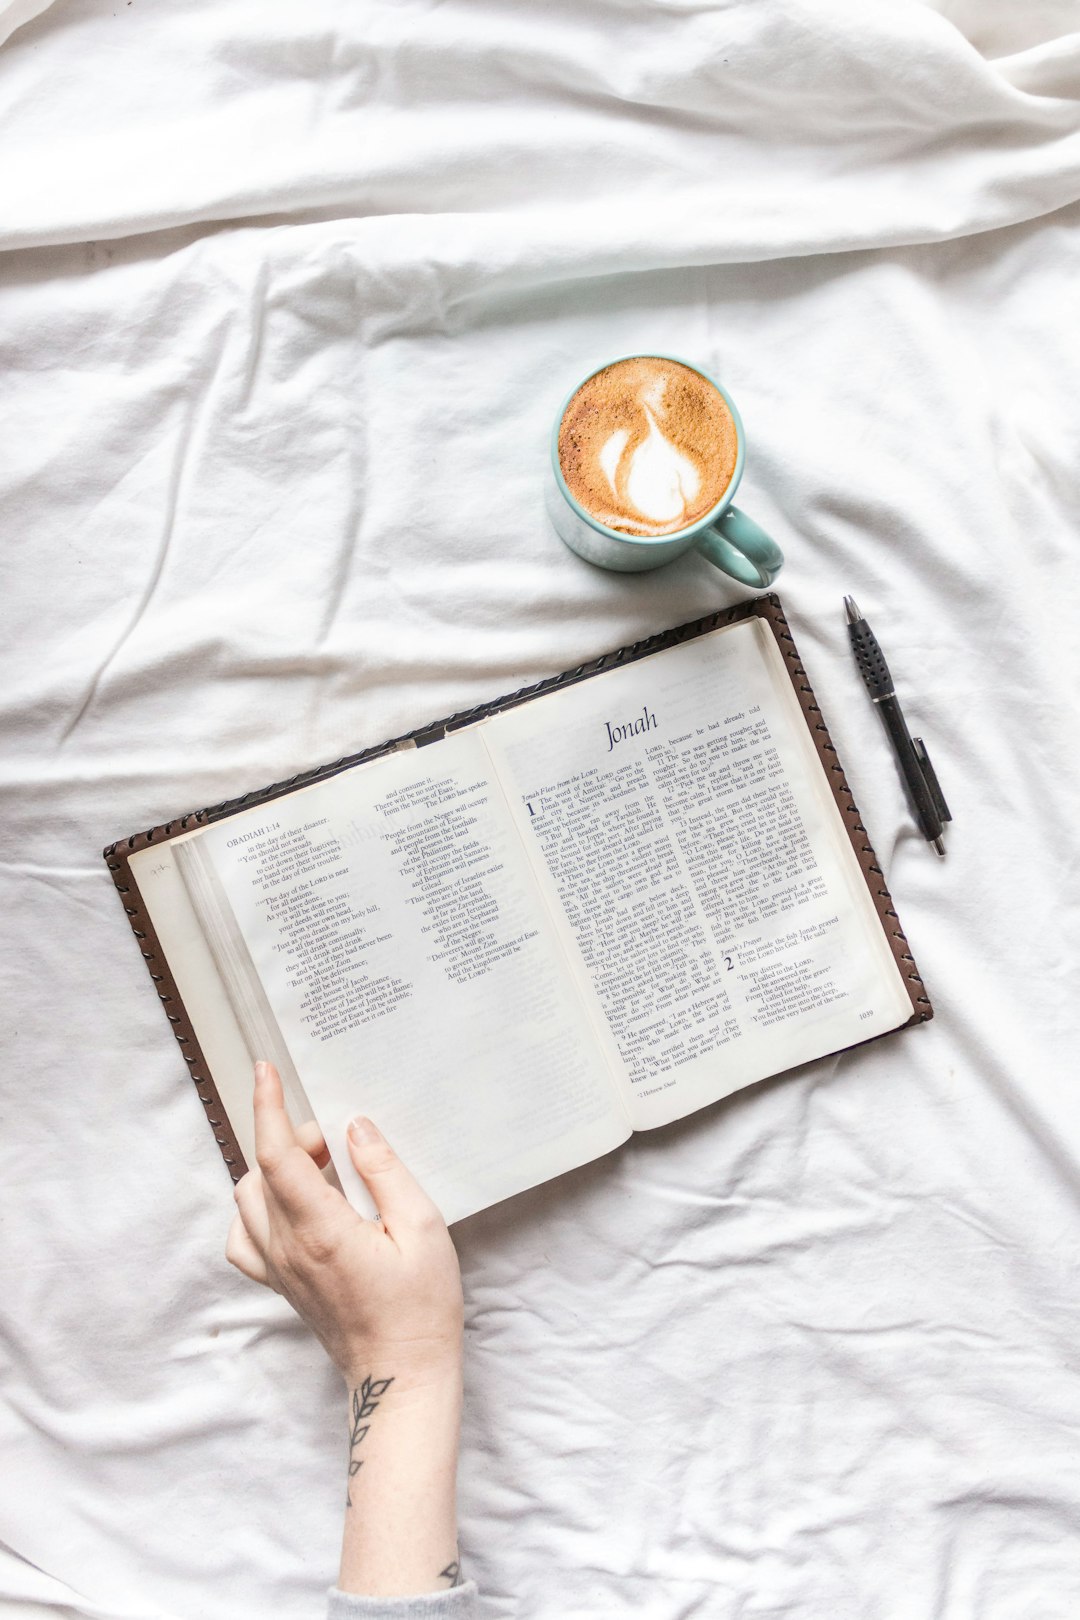 person holding white book page beside black pen and white ceramic mug on white textile